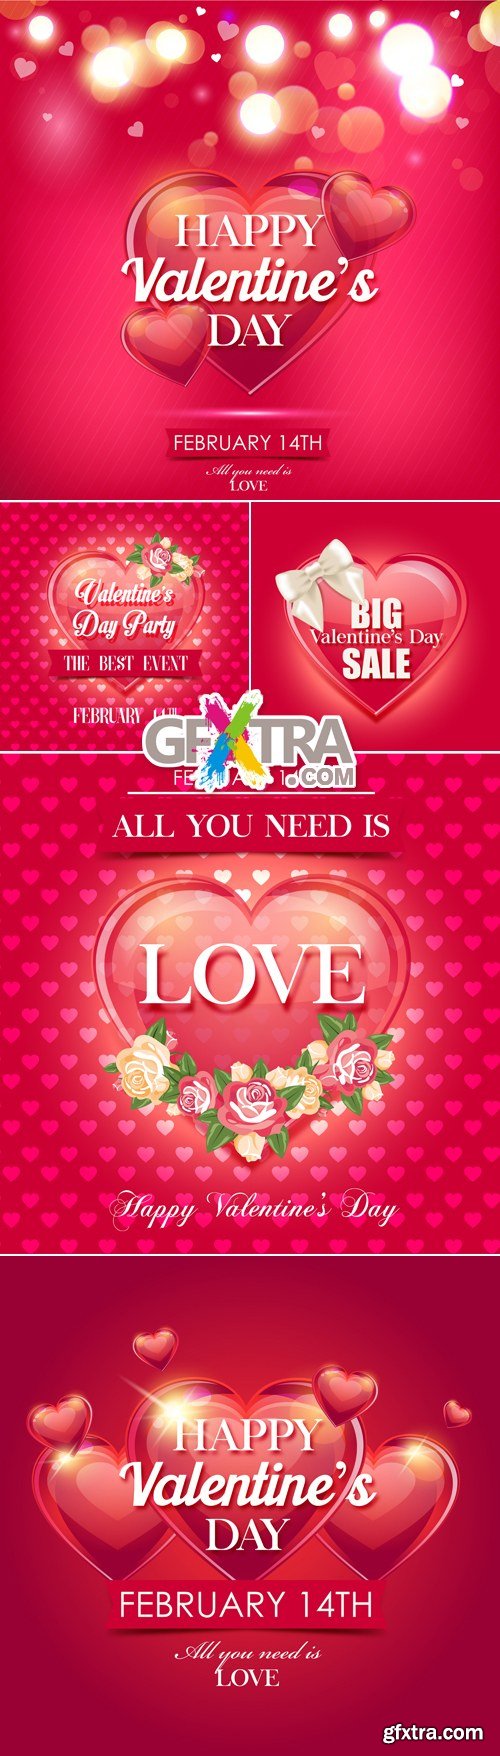 Valentine\'s Day 2017 Backgrounds Vector